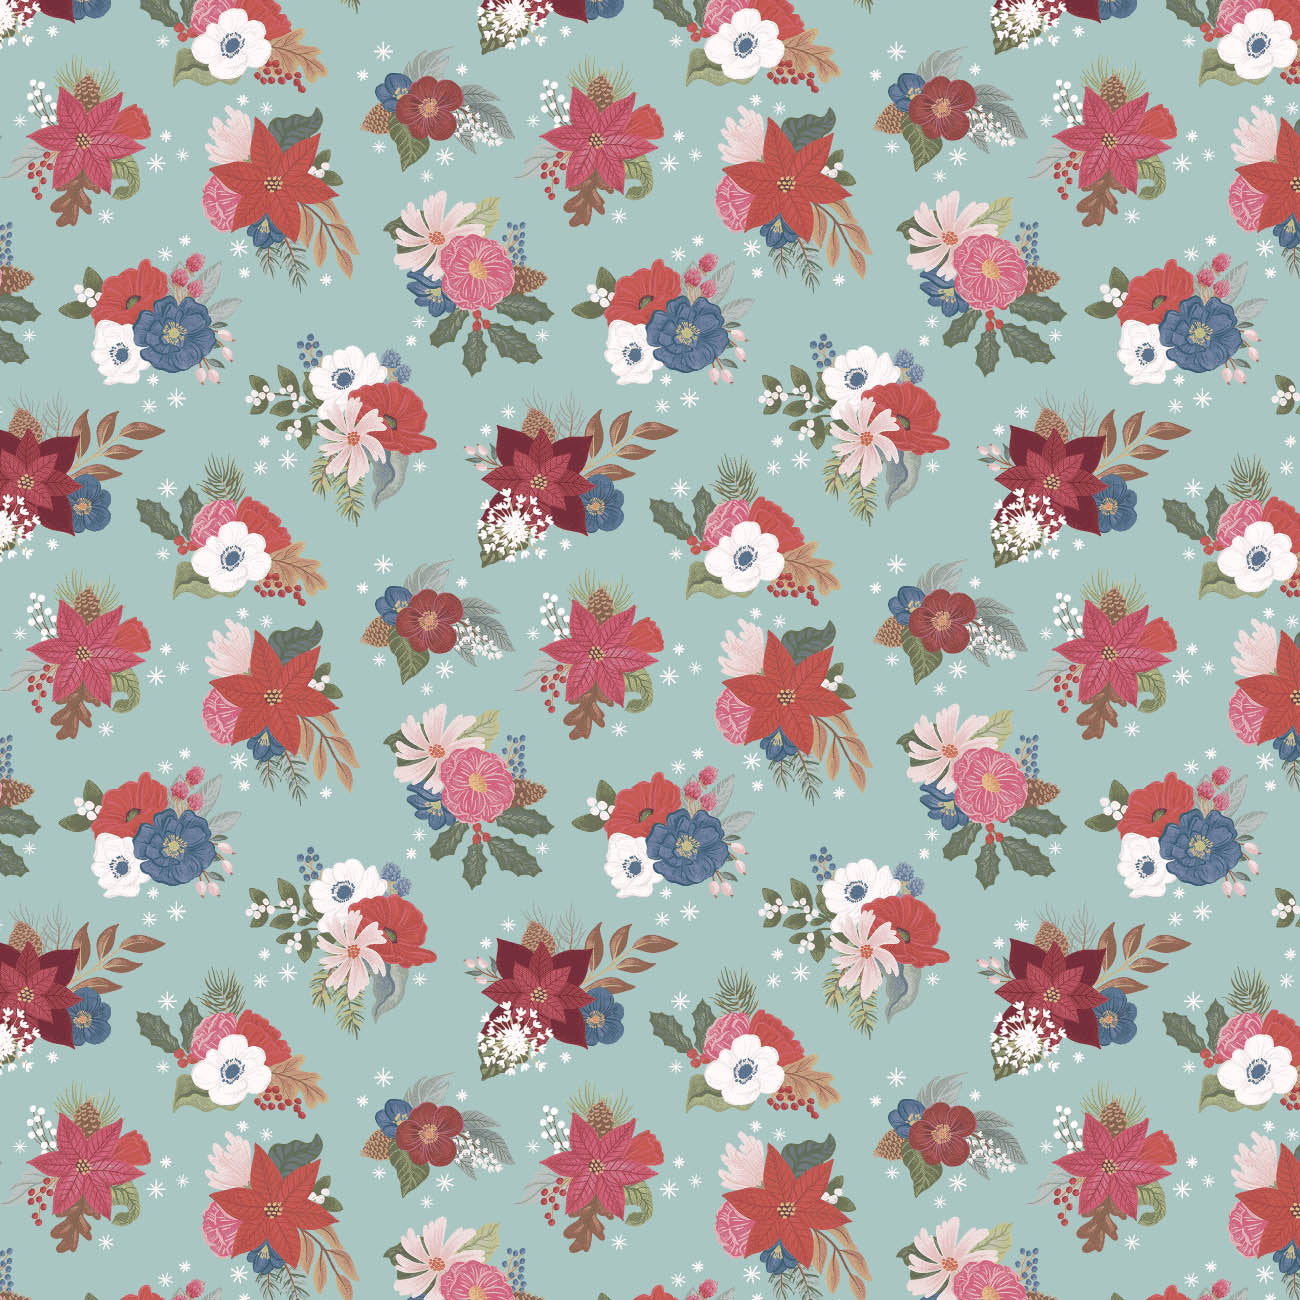 Winter Spirit Collection - Winter Bouquets - Light Teal - Cotton